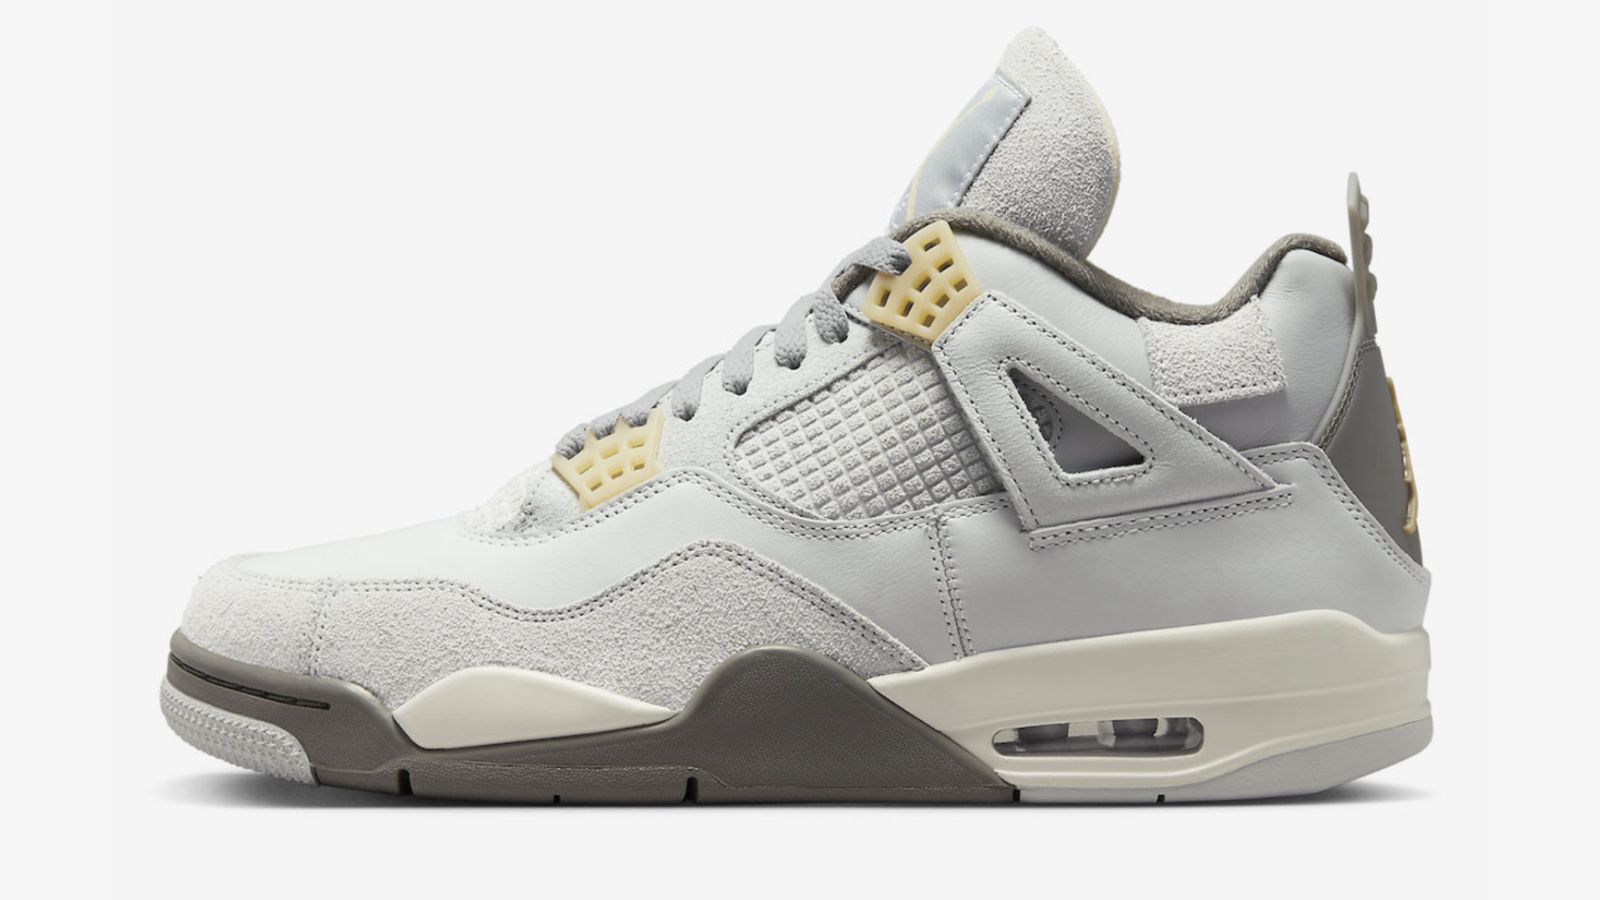 Air Jordan 4 "Photon Dust" product image of a pale grey sneaker with darker grey and vanilla accents.